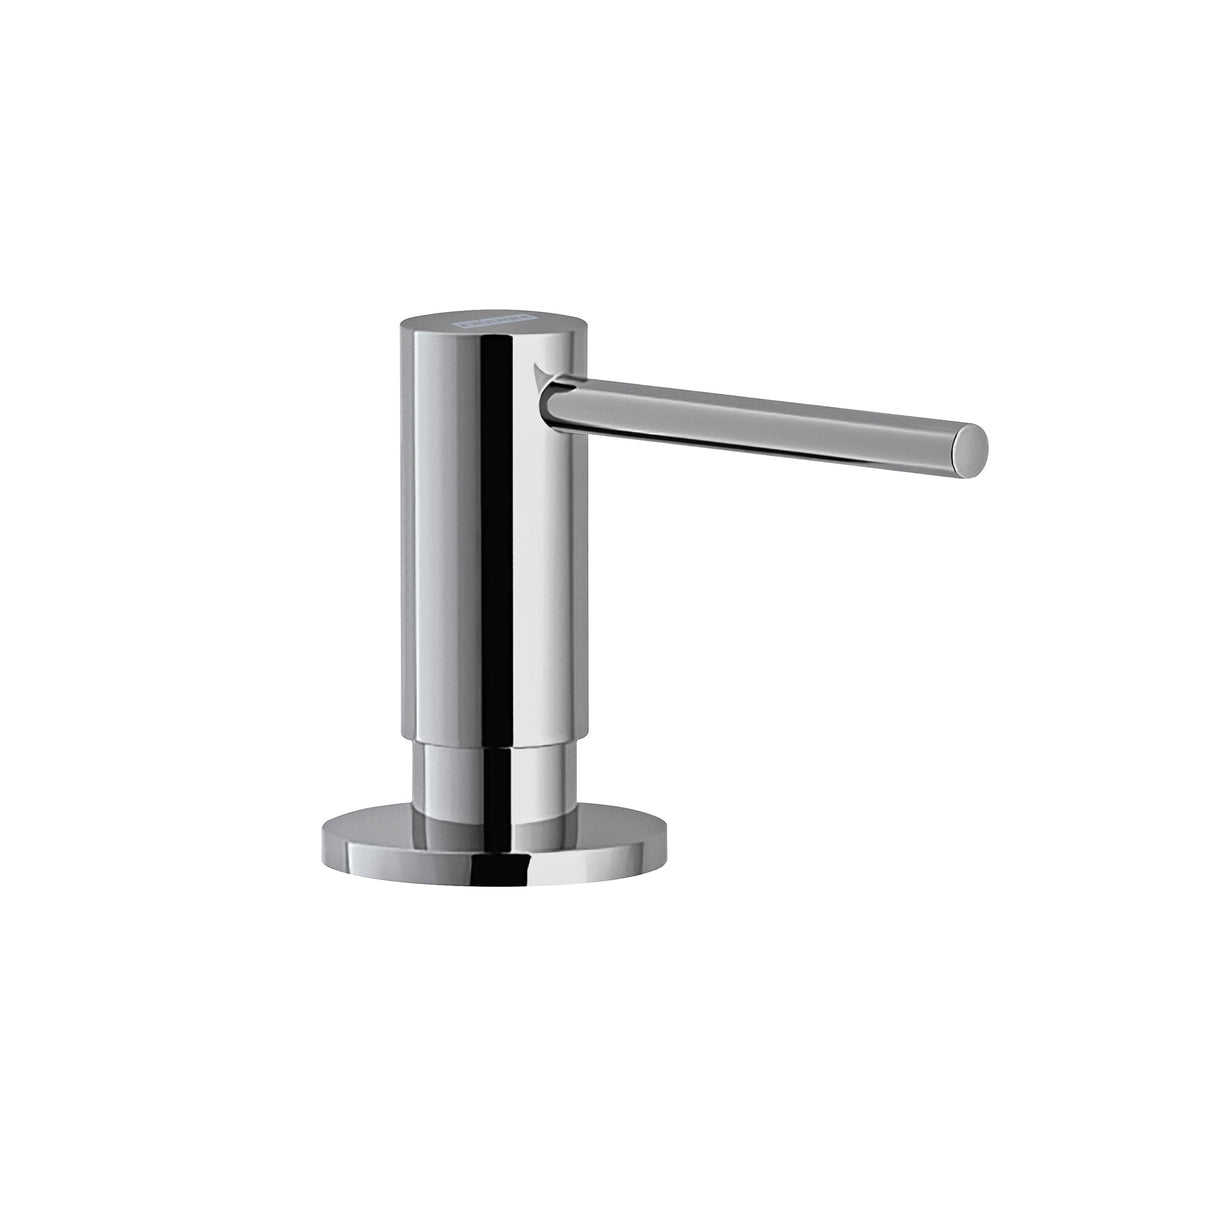 FRANKE ACT-SD-CHR Active ACT-SD-CHR Single Hole Top Refill Soap Dispenser in Polished Chrome. In Chrome